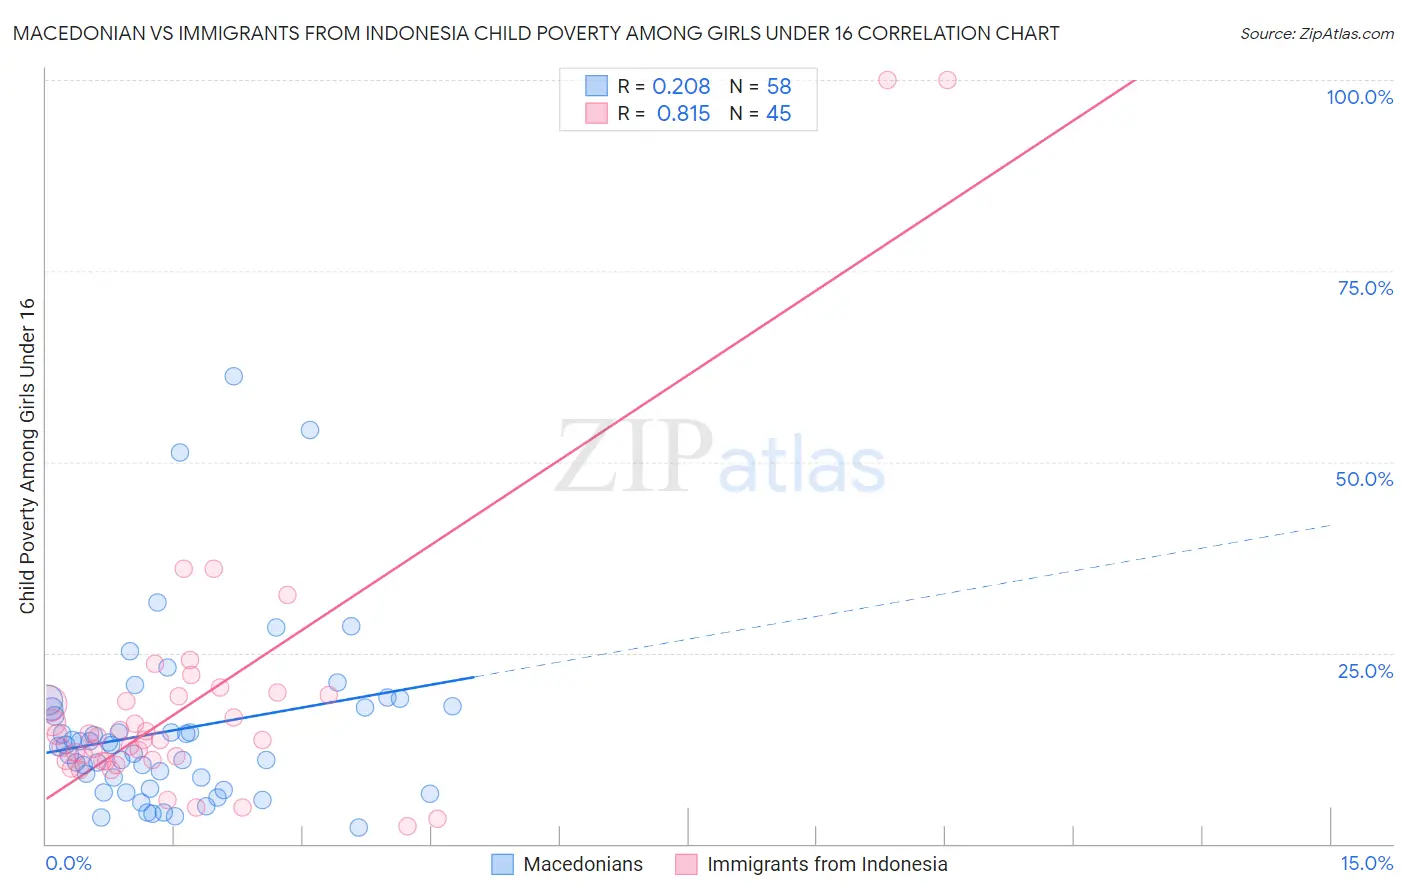 Macedonian vs Immigrants from Indonesia Child Poverty Among Girls Under 16